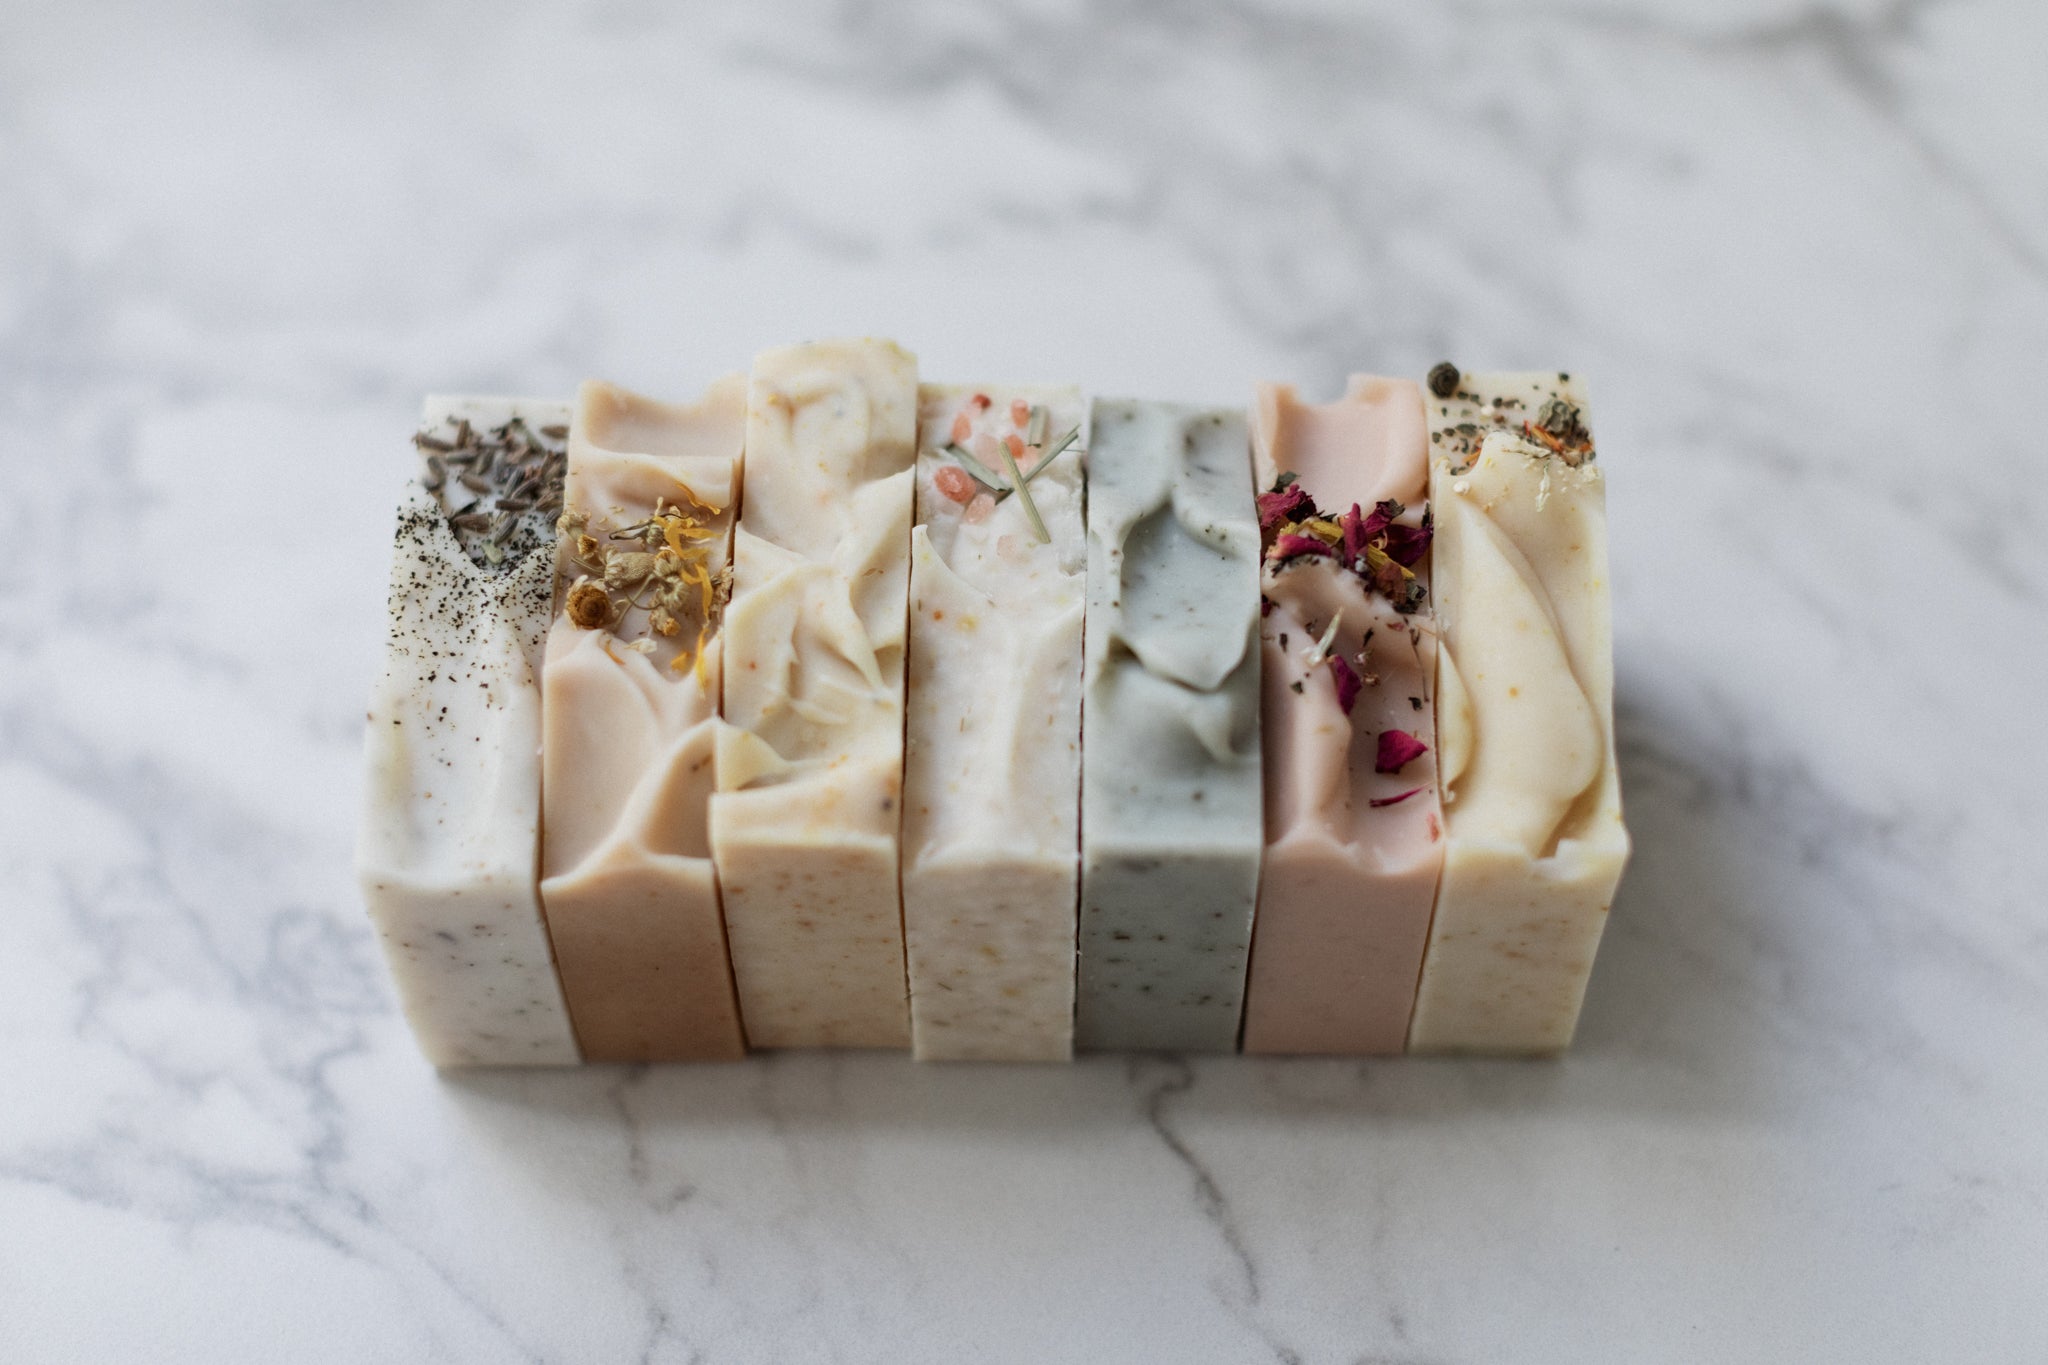 Luxury soap bars by Chalke Valley Soaps